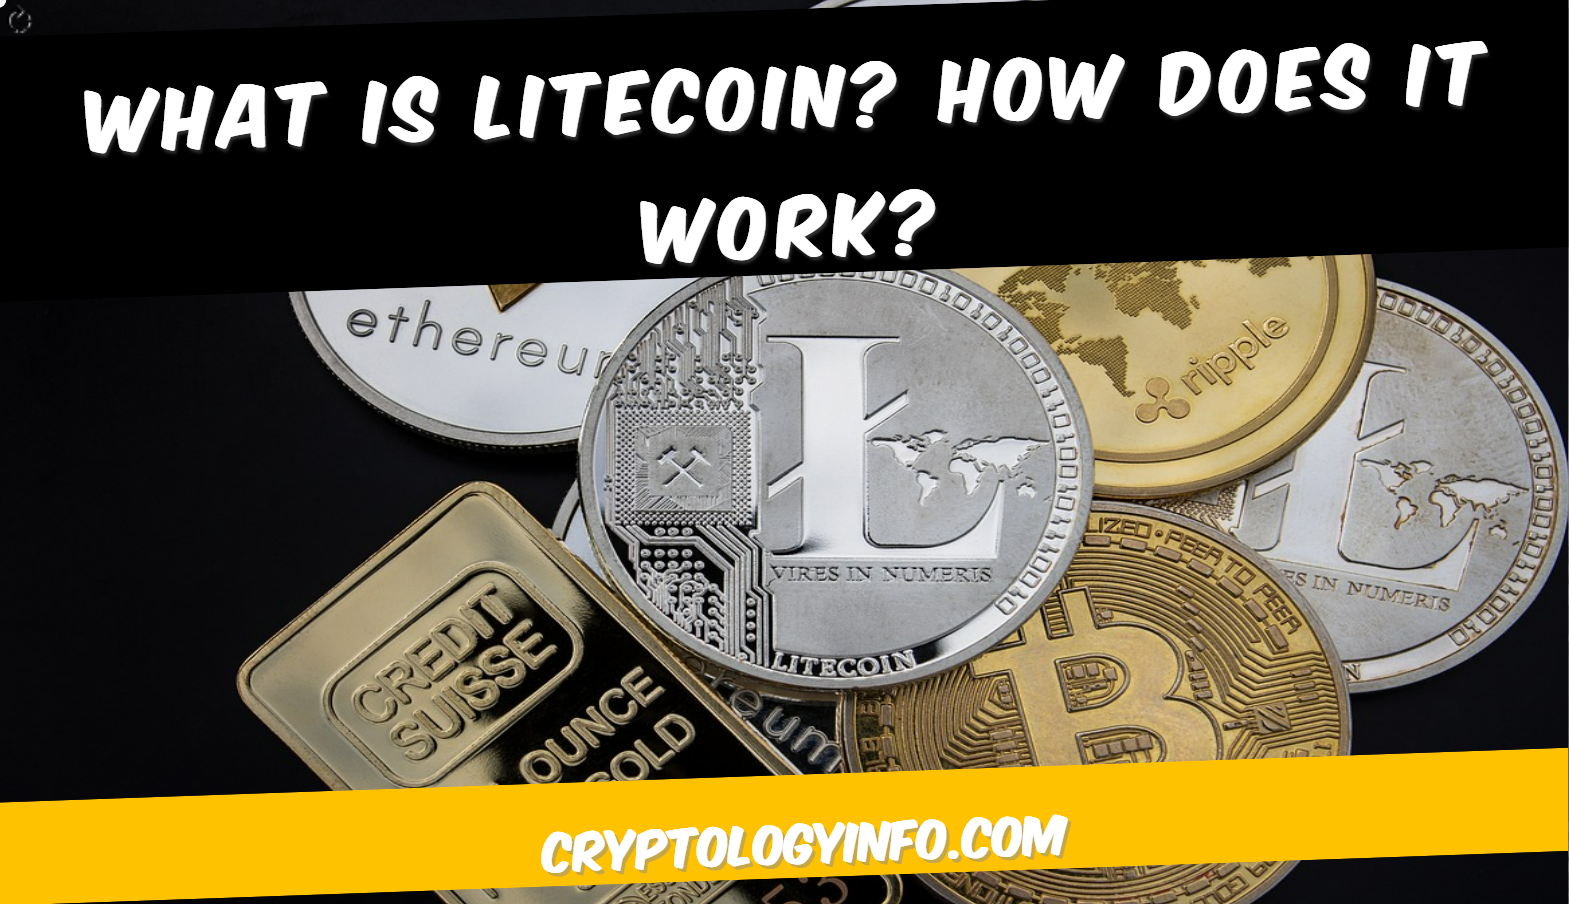 What Is Litecoin? How Does It Work?